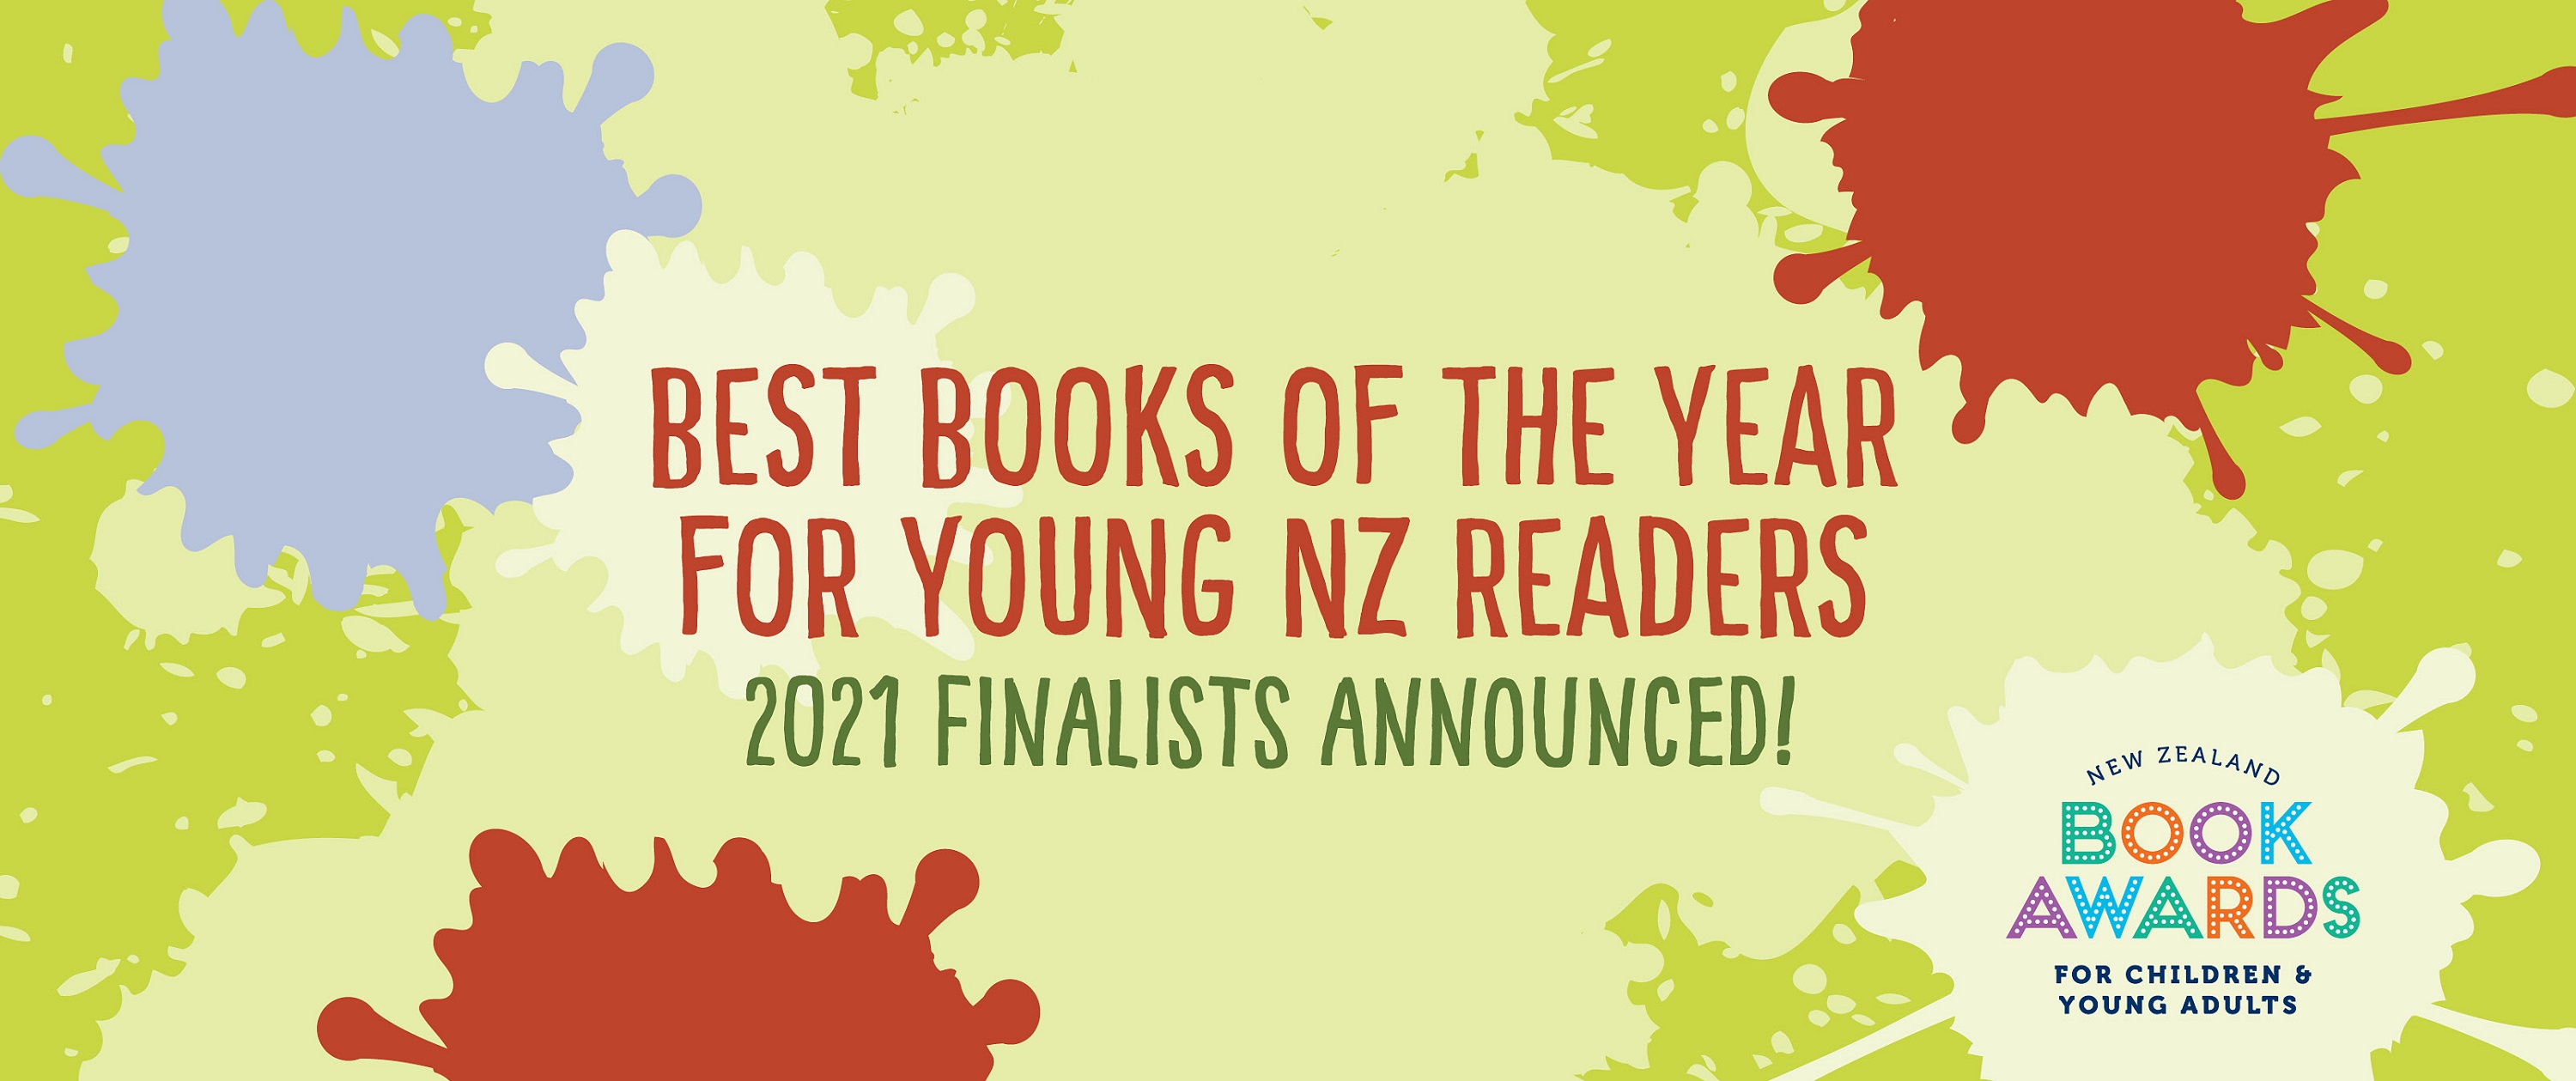 New Zealand Book Awards for Children and Young Adults 2021 finalists announced